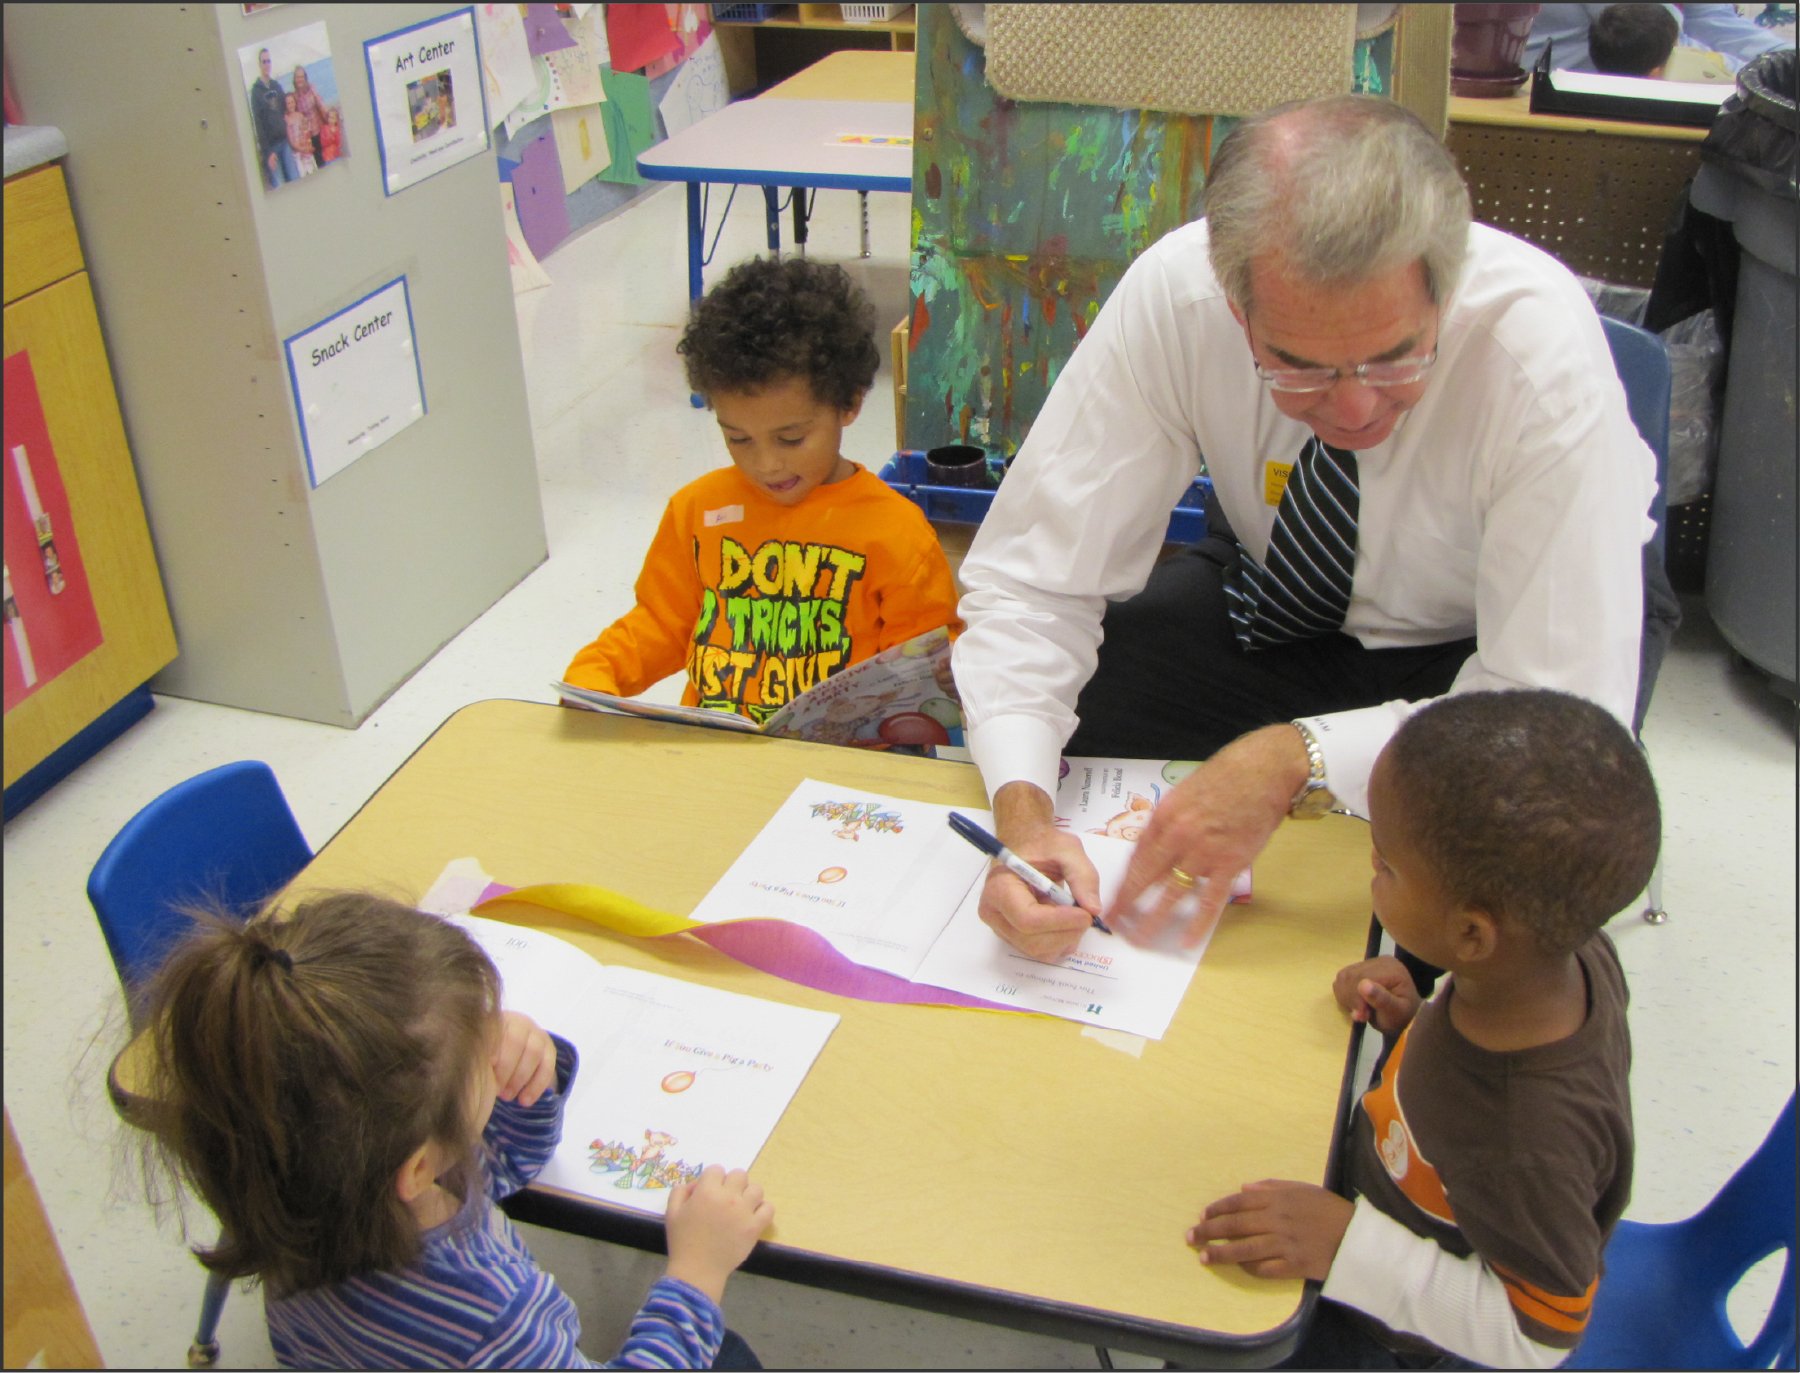 Michel McCord taking part in an educational volunteer activity on behalf of Illinois Mutual.